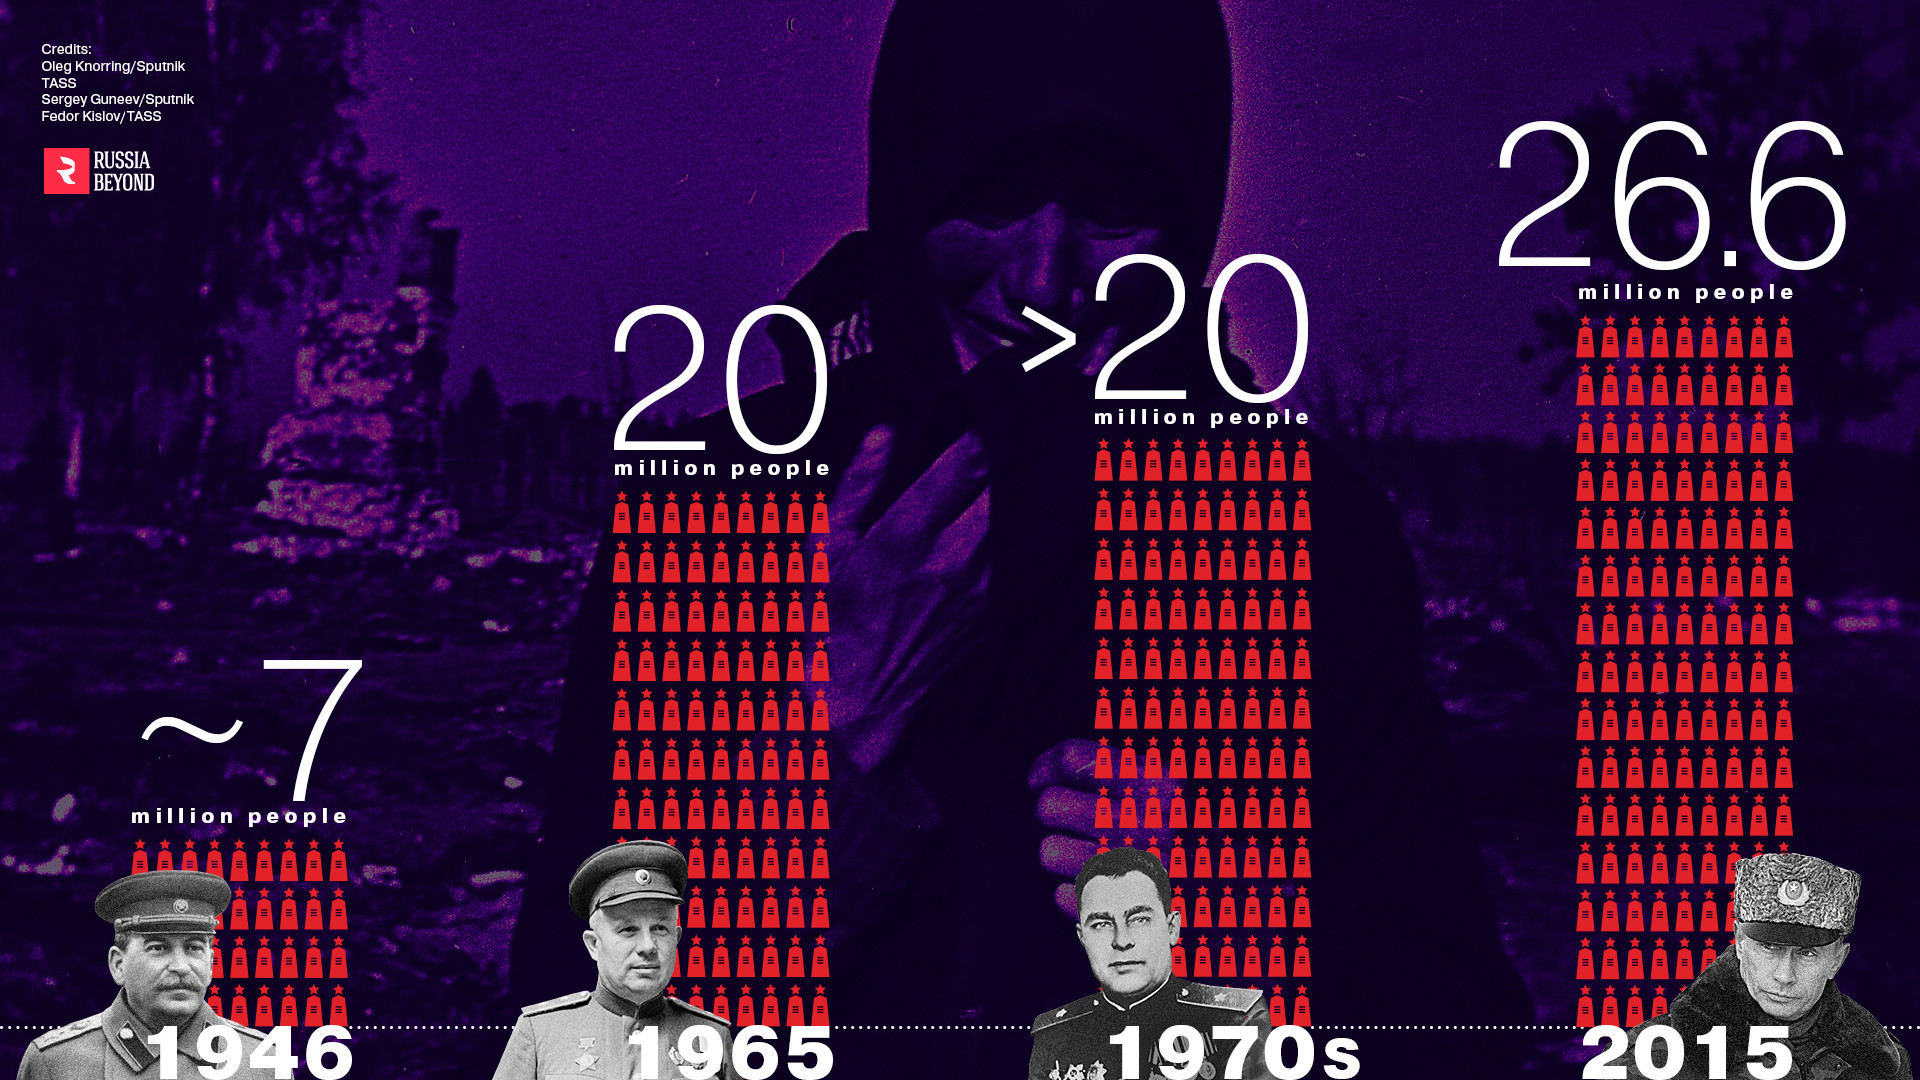 That's how the official estimate of the number of people the USSR lost to WWII changed from 1946 to 2015.